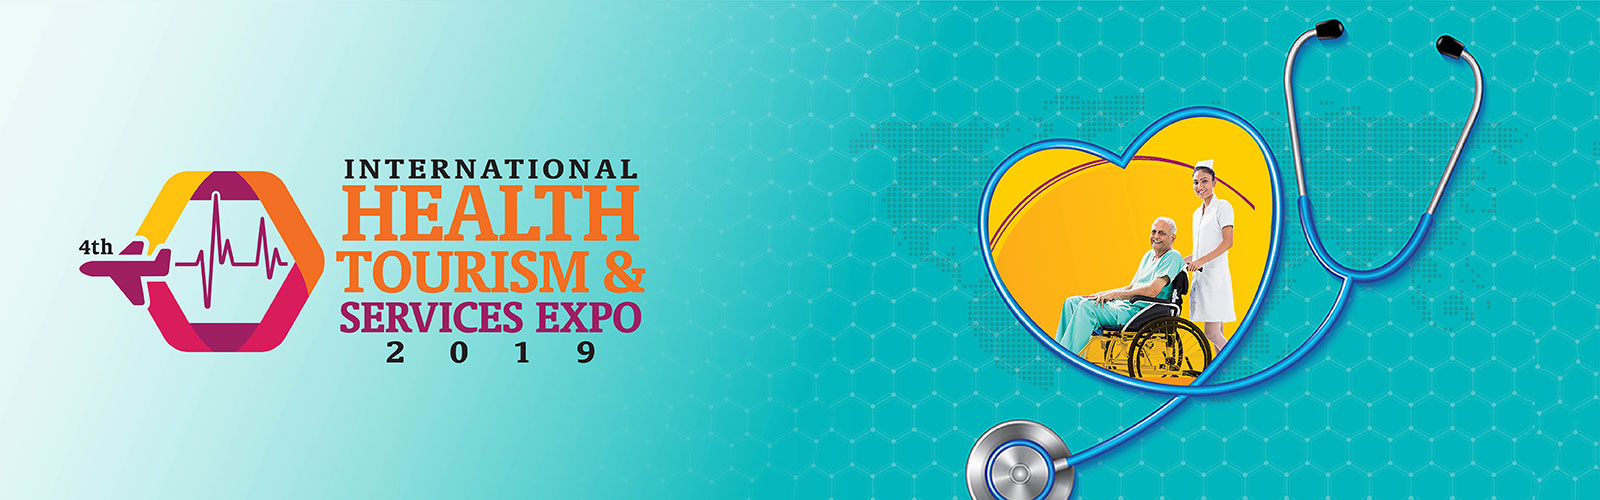  4th International Health Tourism & Services Expo 2019